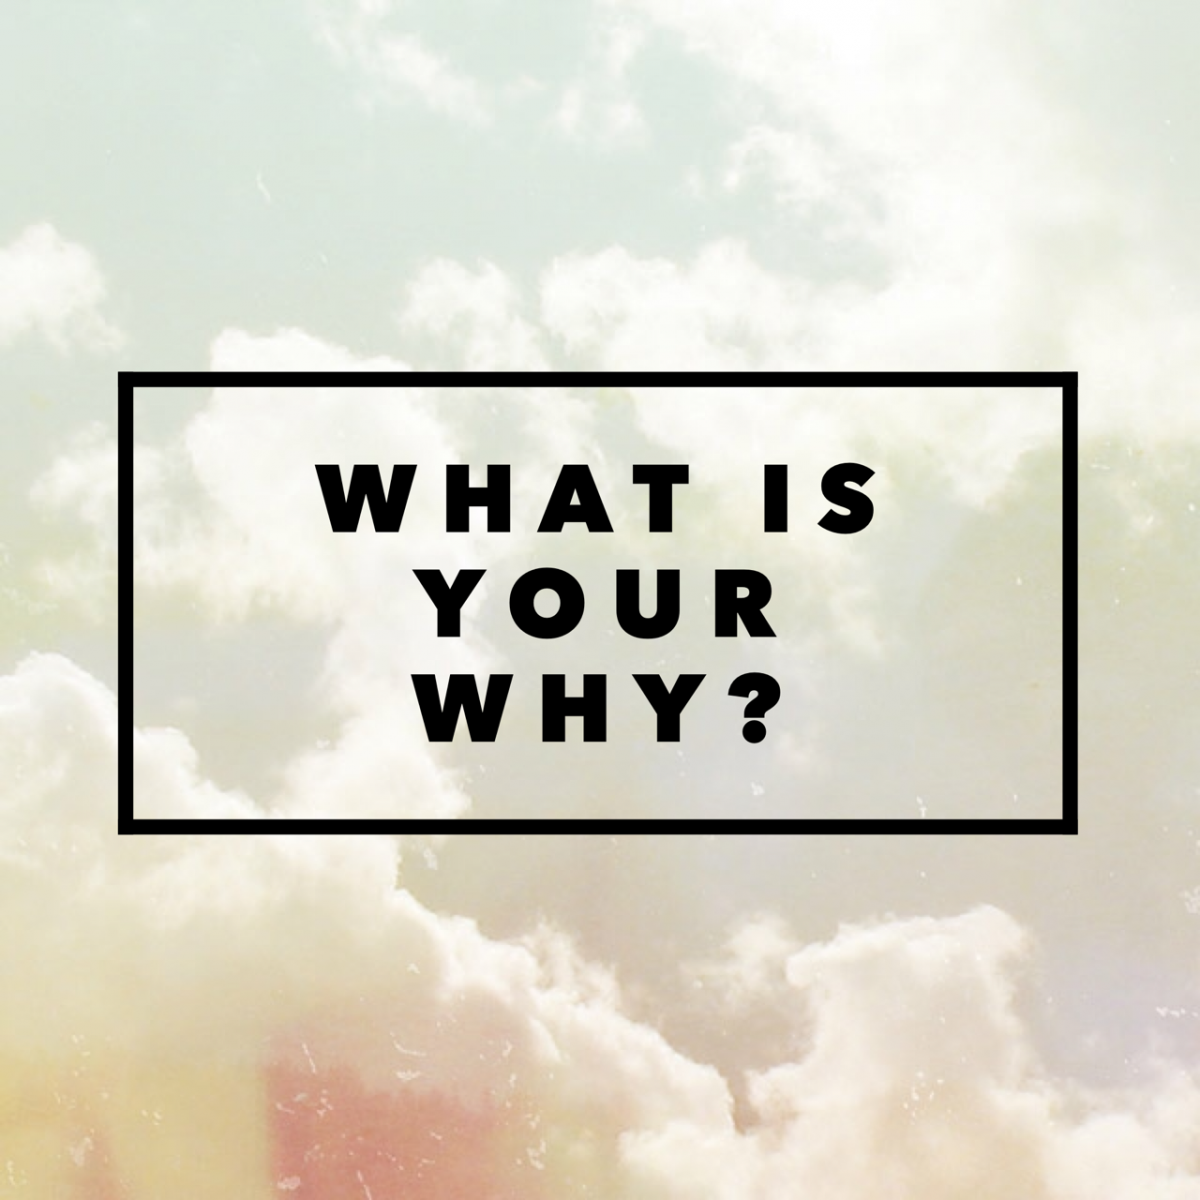 If your “why” is strong enough, the “how” doesn’t matter